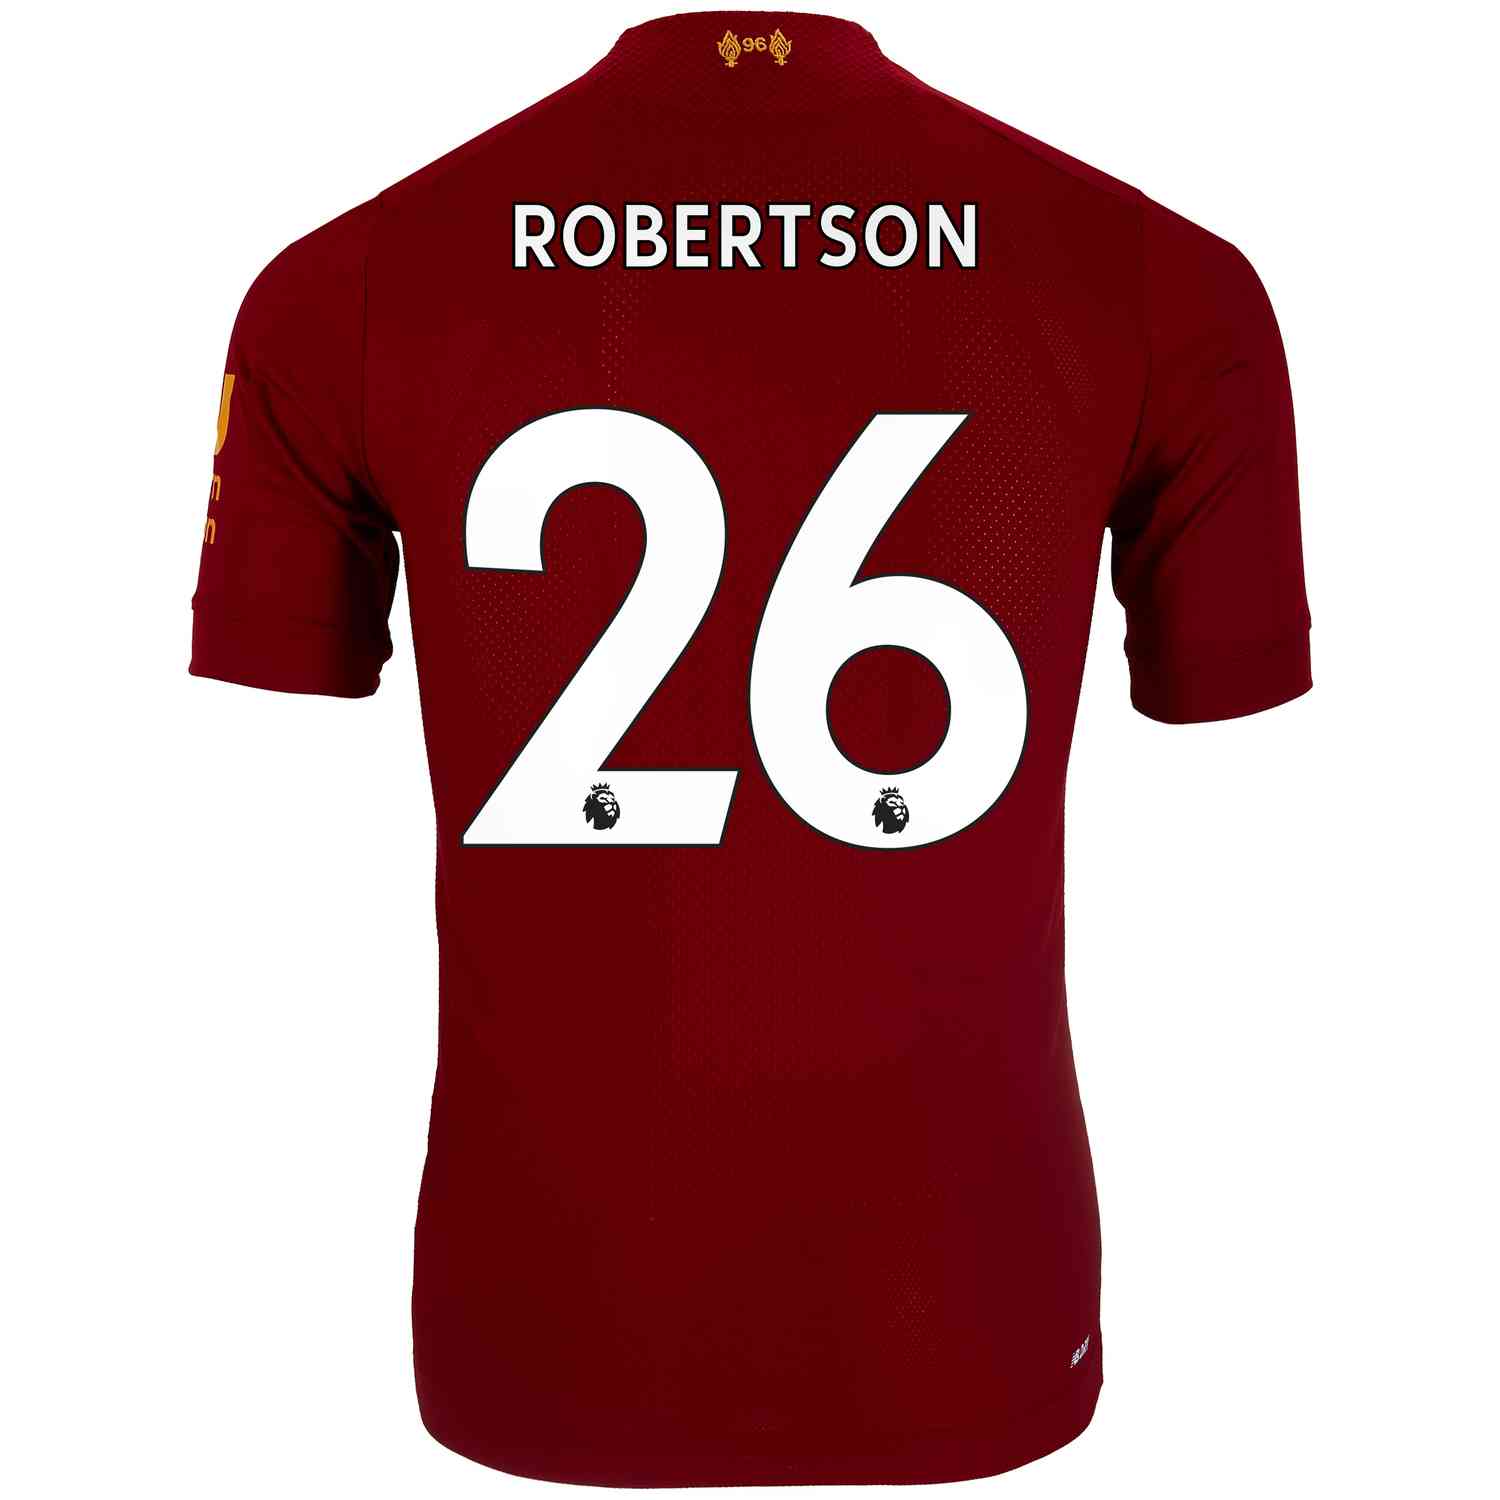 andrew robertson jersey number